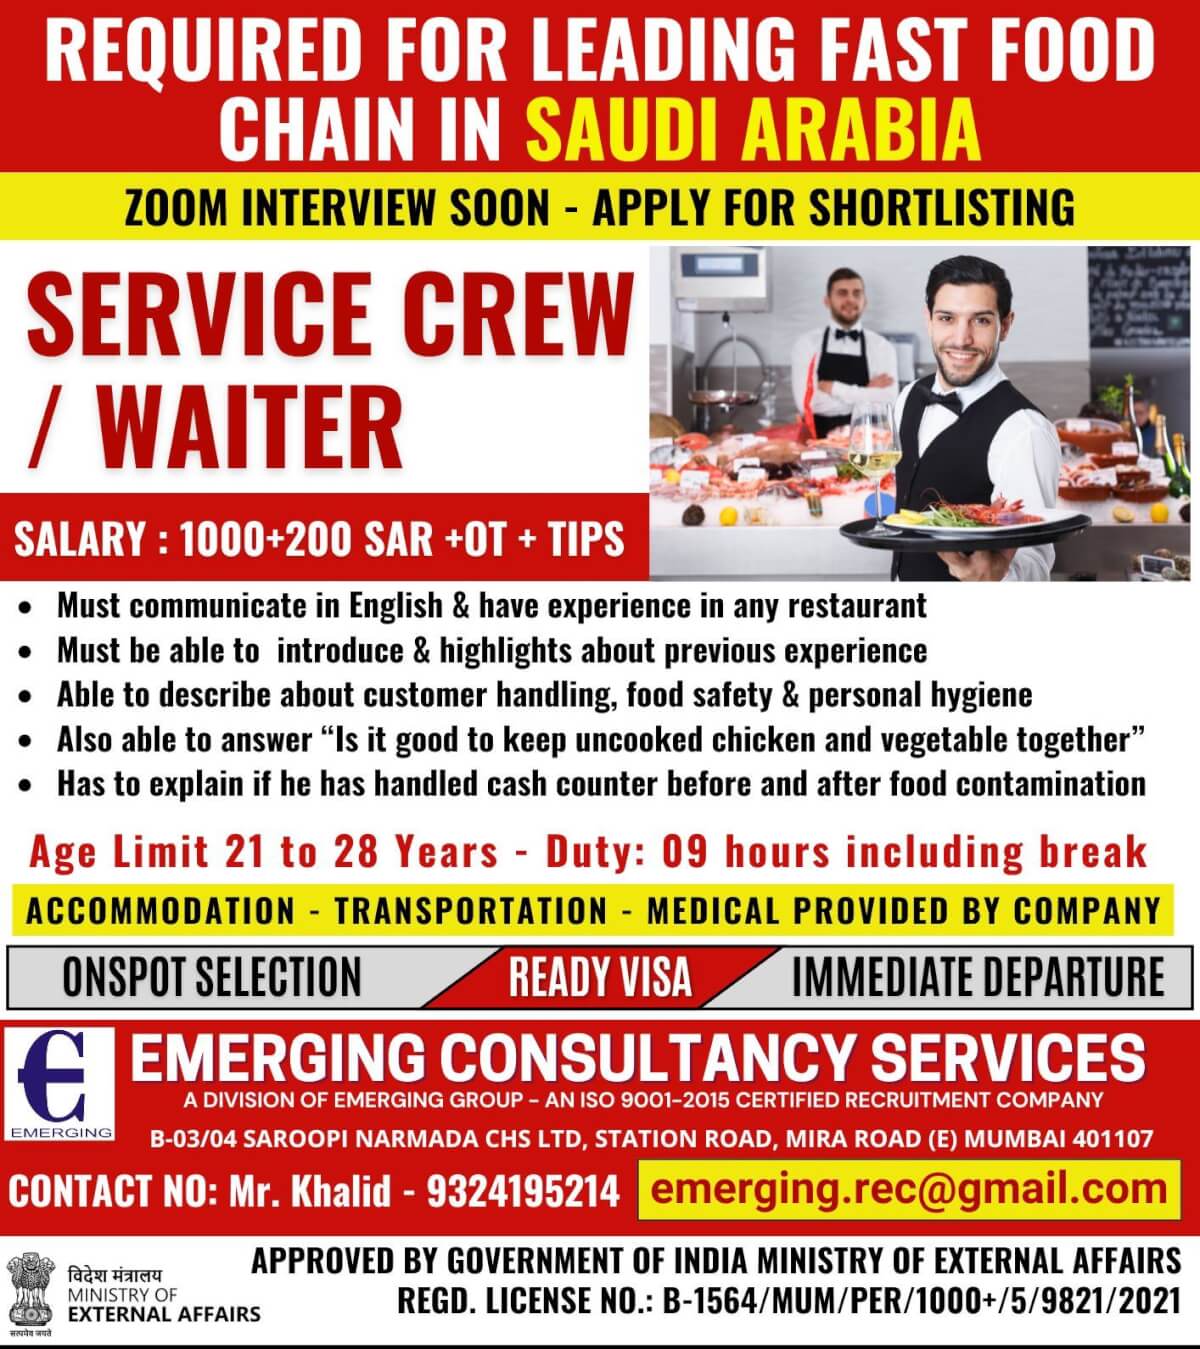 REQUIRED FOR LEADING FAST FOOD CHAIN IN SAUDI ARABIA